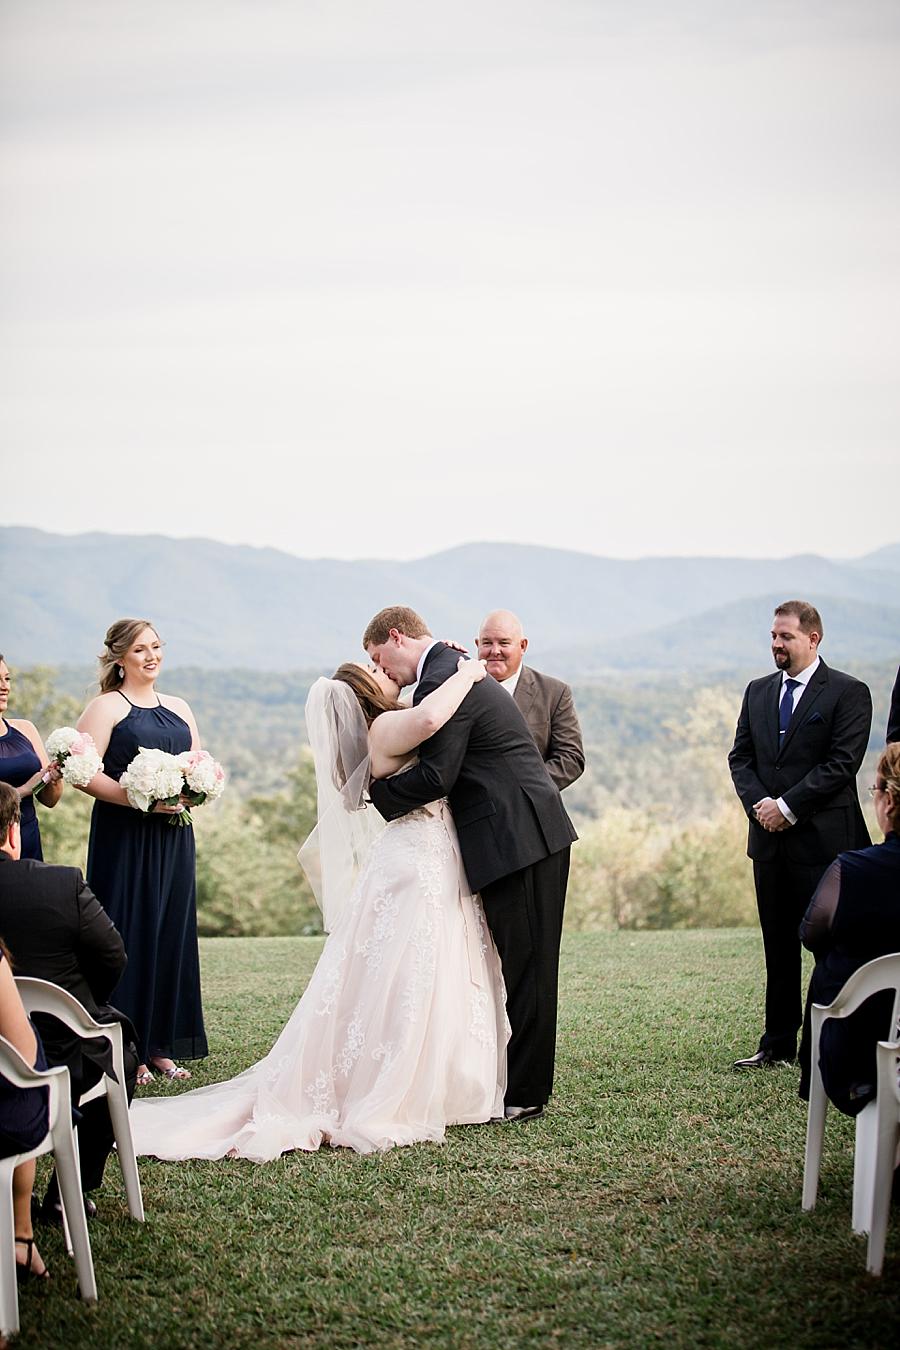 You may now kiss the bride at this Christopher Place wedding by Knoxville Wedding Photographer, Amanda May Photos